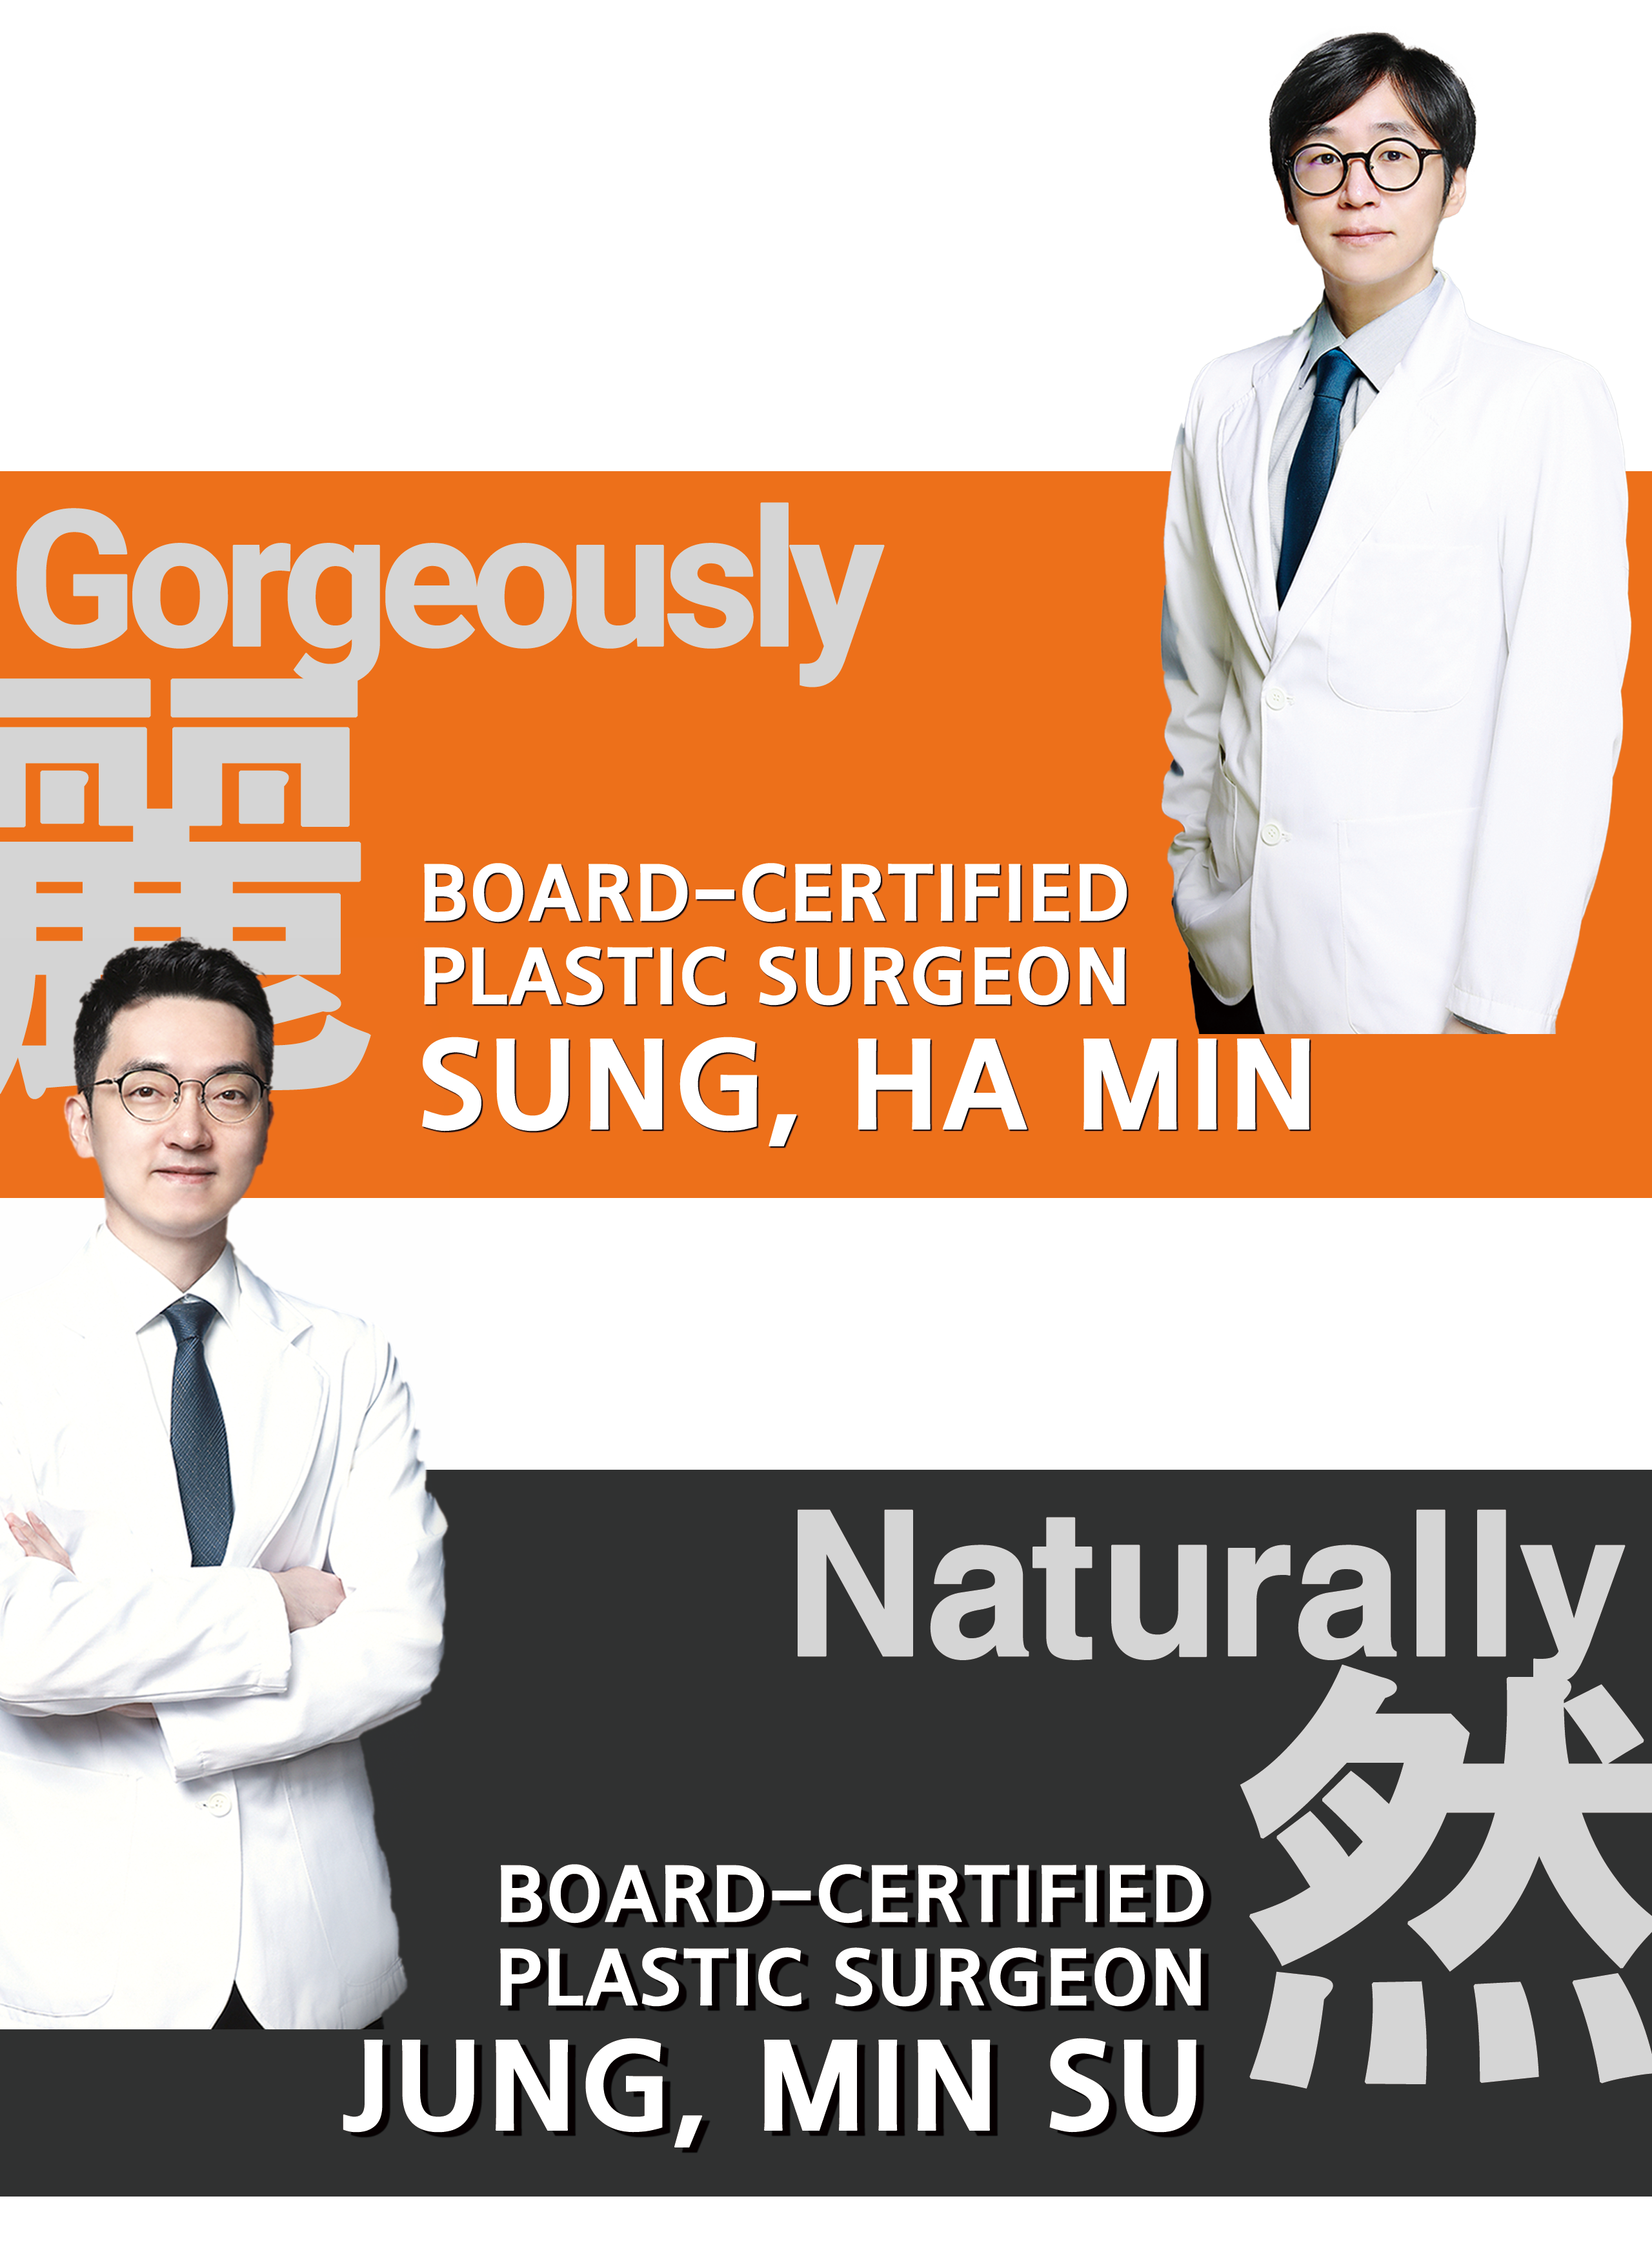 RHINOSURGERY_LINK PLASTIC SURGERY_NATURALLY_GORGEOUSLY_DR.JUNG_DR.SUNG